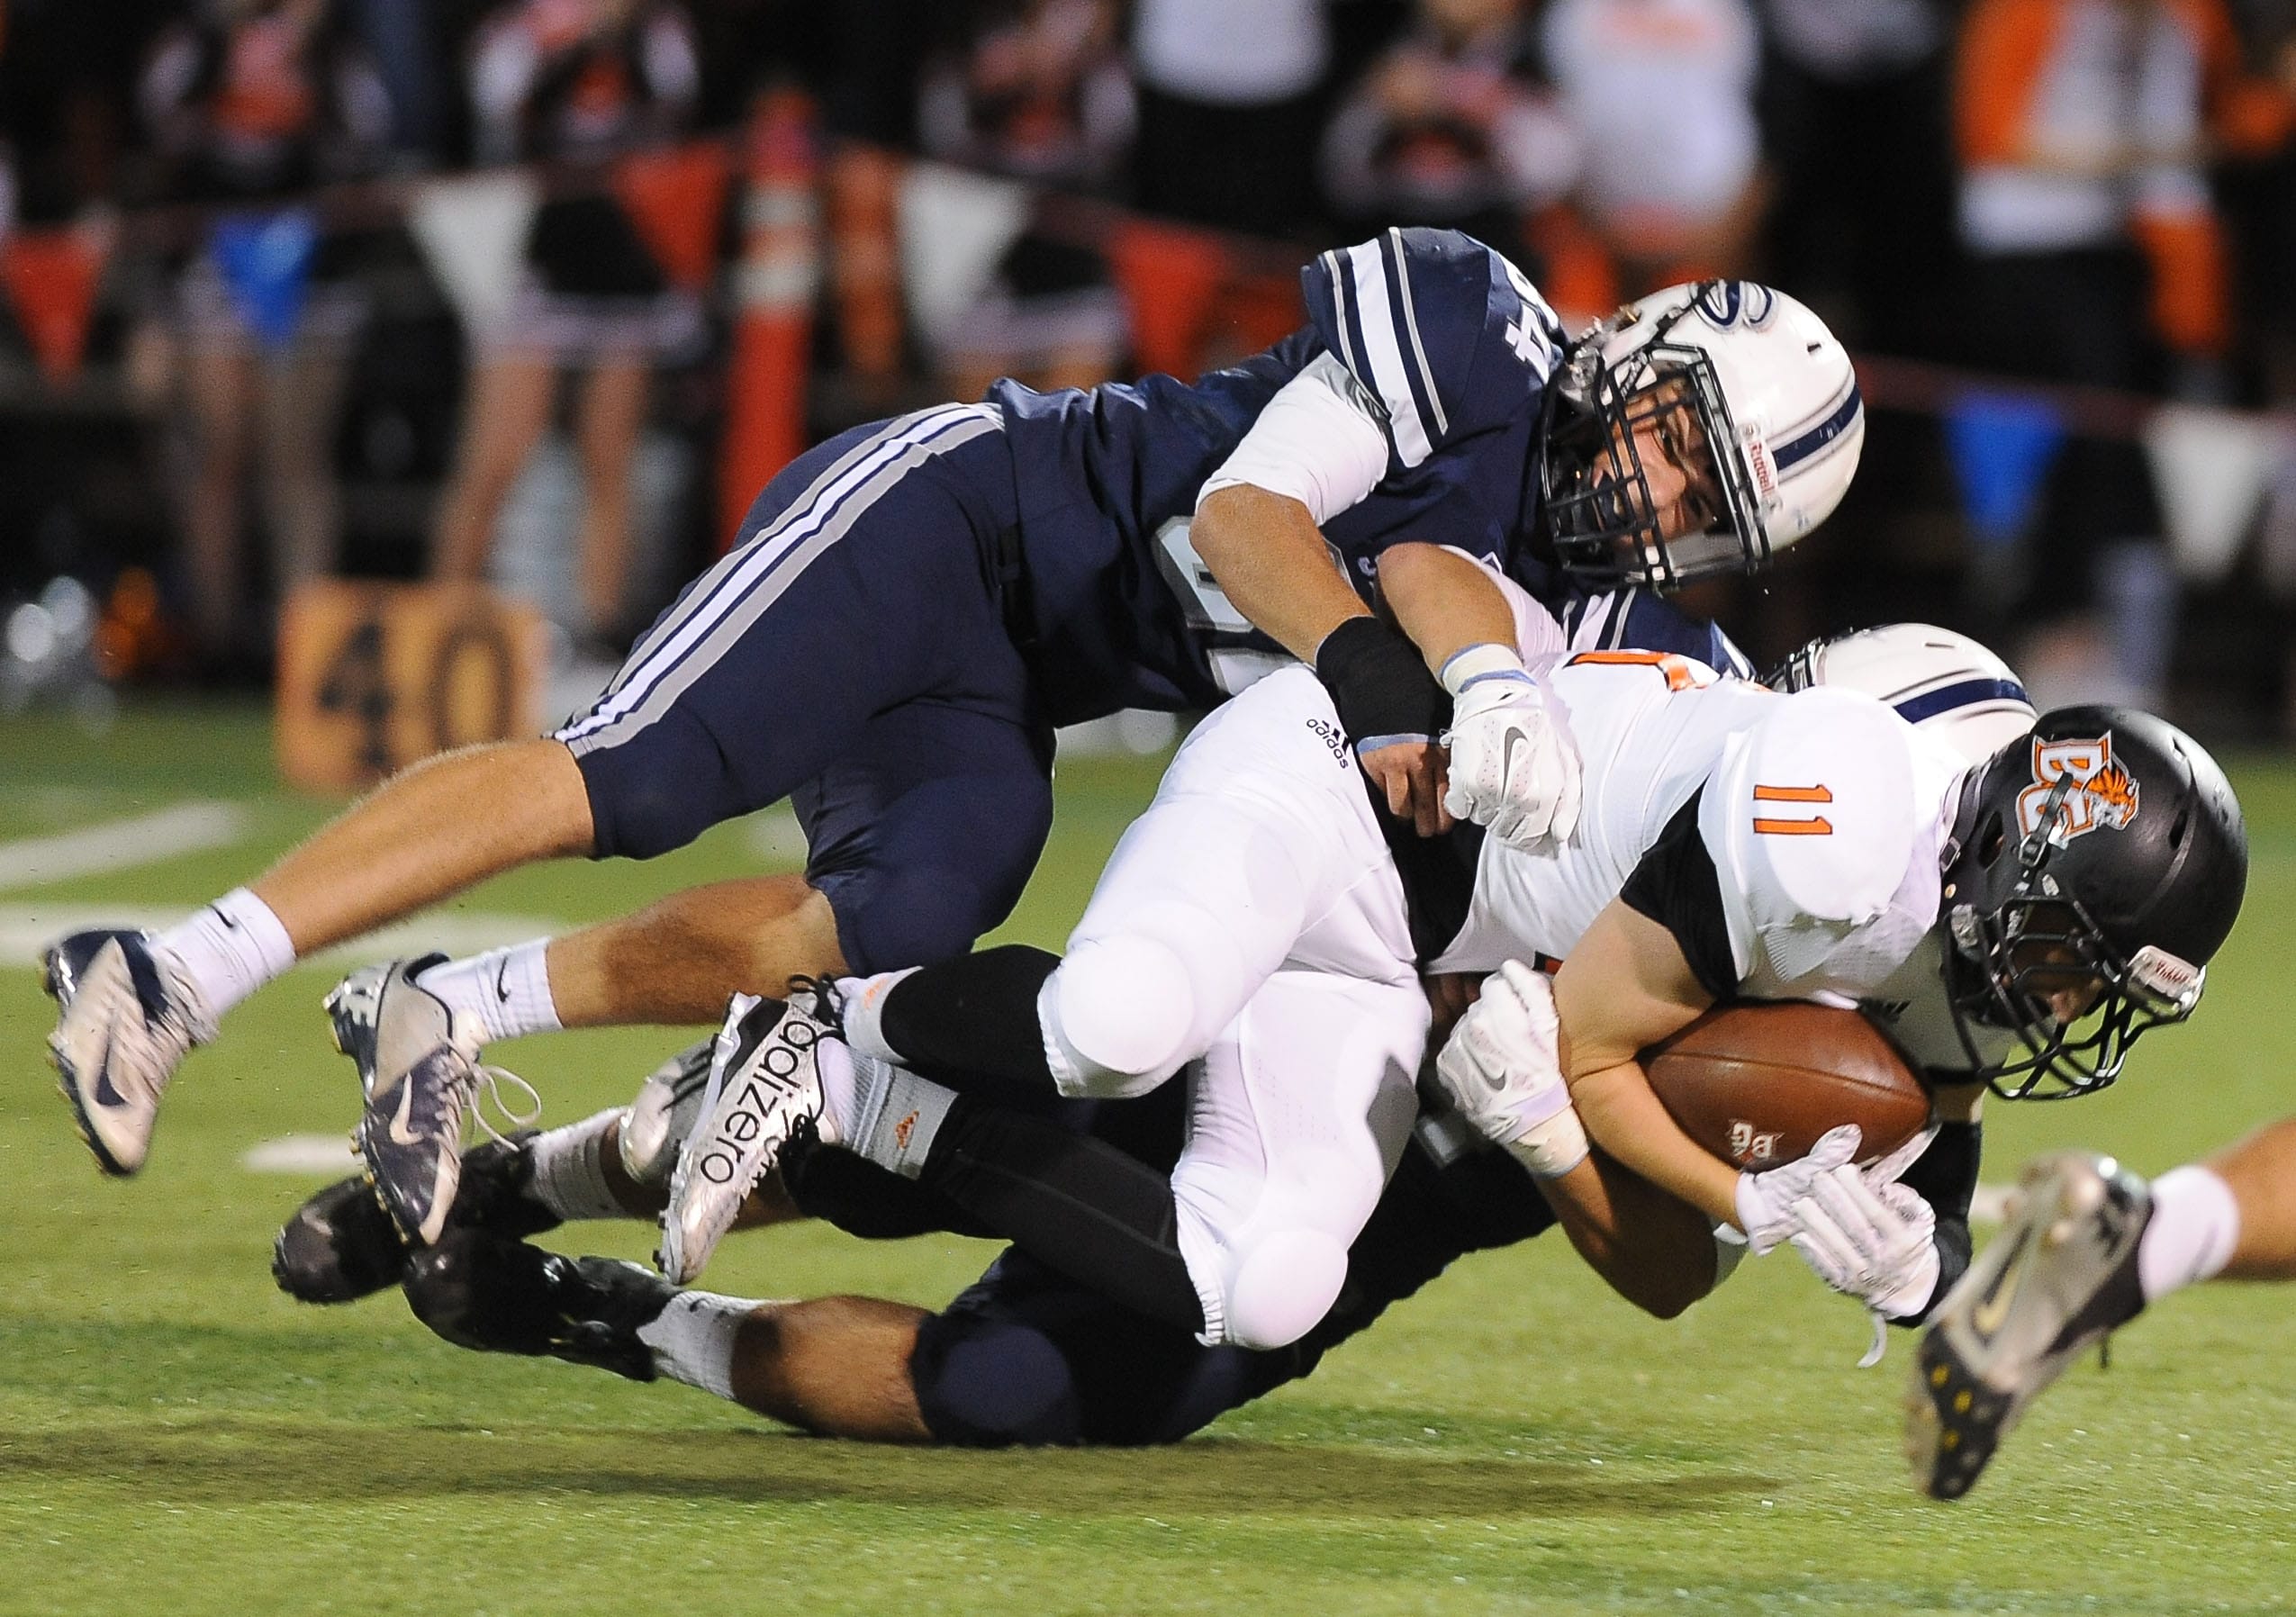 Battle Ground's Kyle Cahoon is tackled by Skyview's Devon Whitley during a game at the Kiggens Bowl in Vancouver, Friday September 17, 2015.